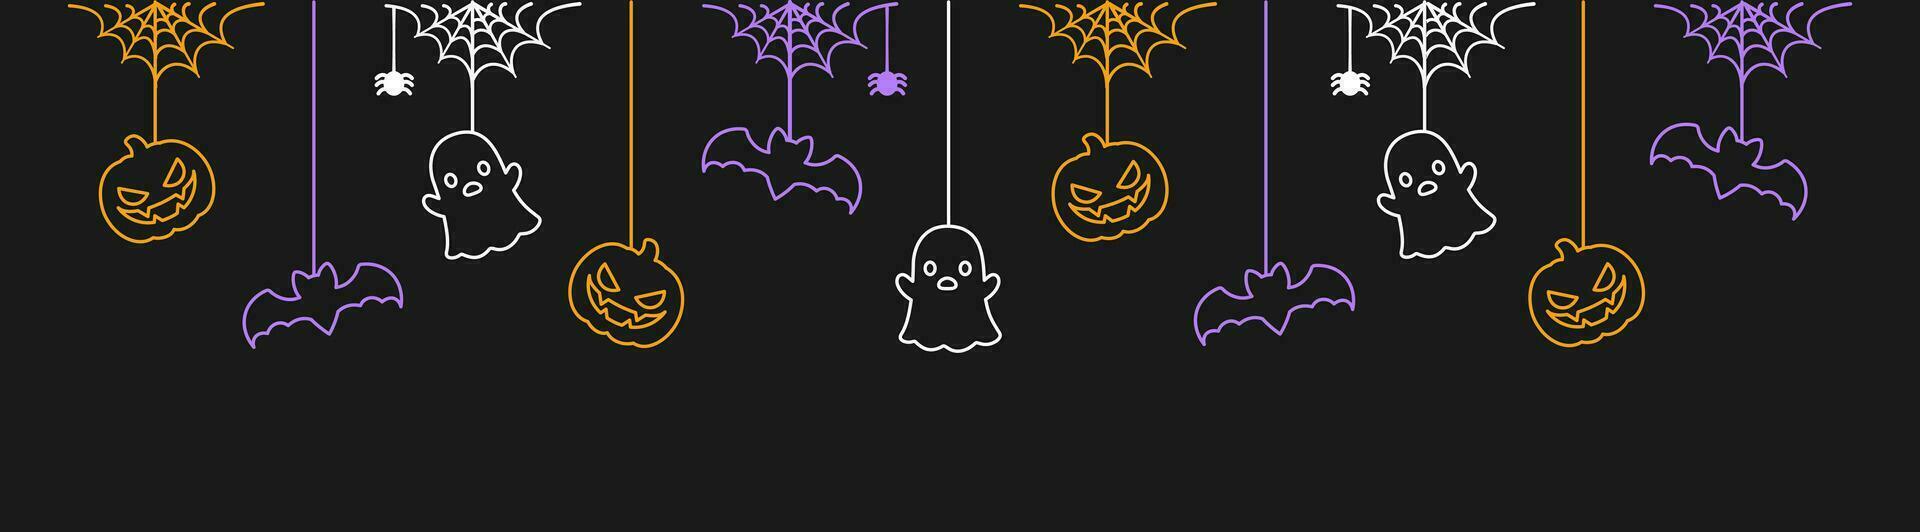 Happy Halloween banner or border with bats, ghost and jack o lantern pumpkins. Glowing Hanging Spooky Ornaments Decoration Vector illustration, trick or treat party invitation